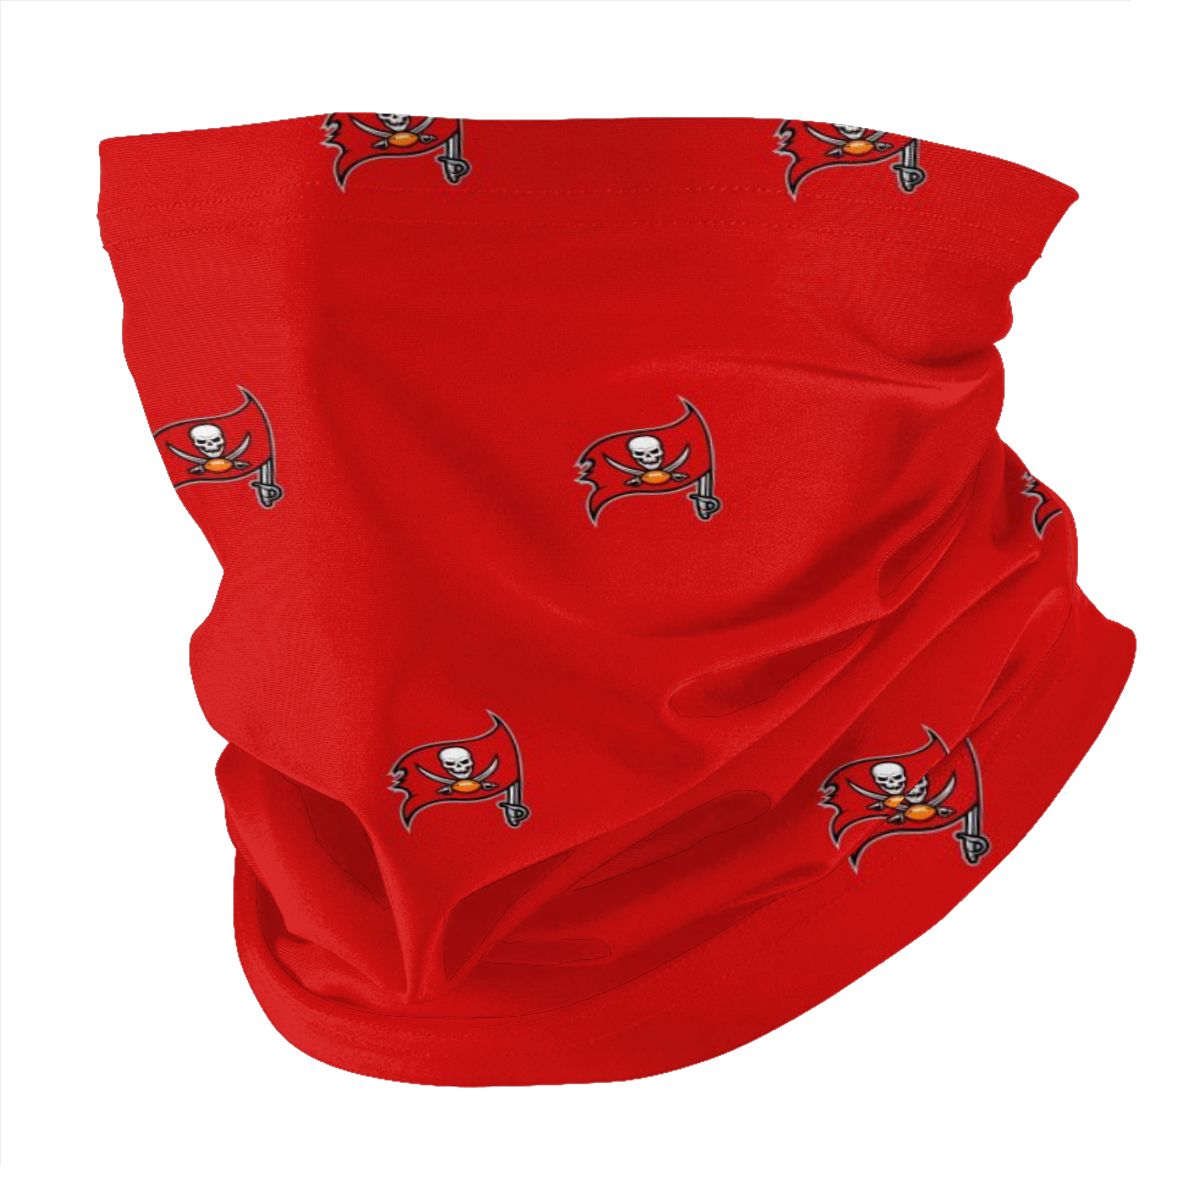 Reusble Mouth Cover Bandanas Tampa Bay Buccaneers Variety Head Scarf Face Mask With PM 2.5 Filter